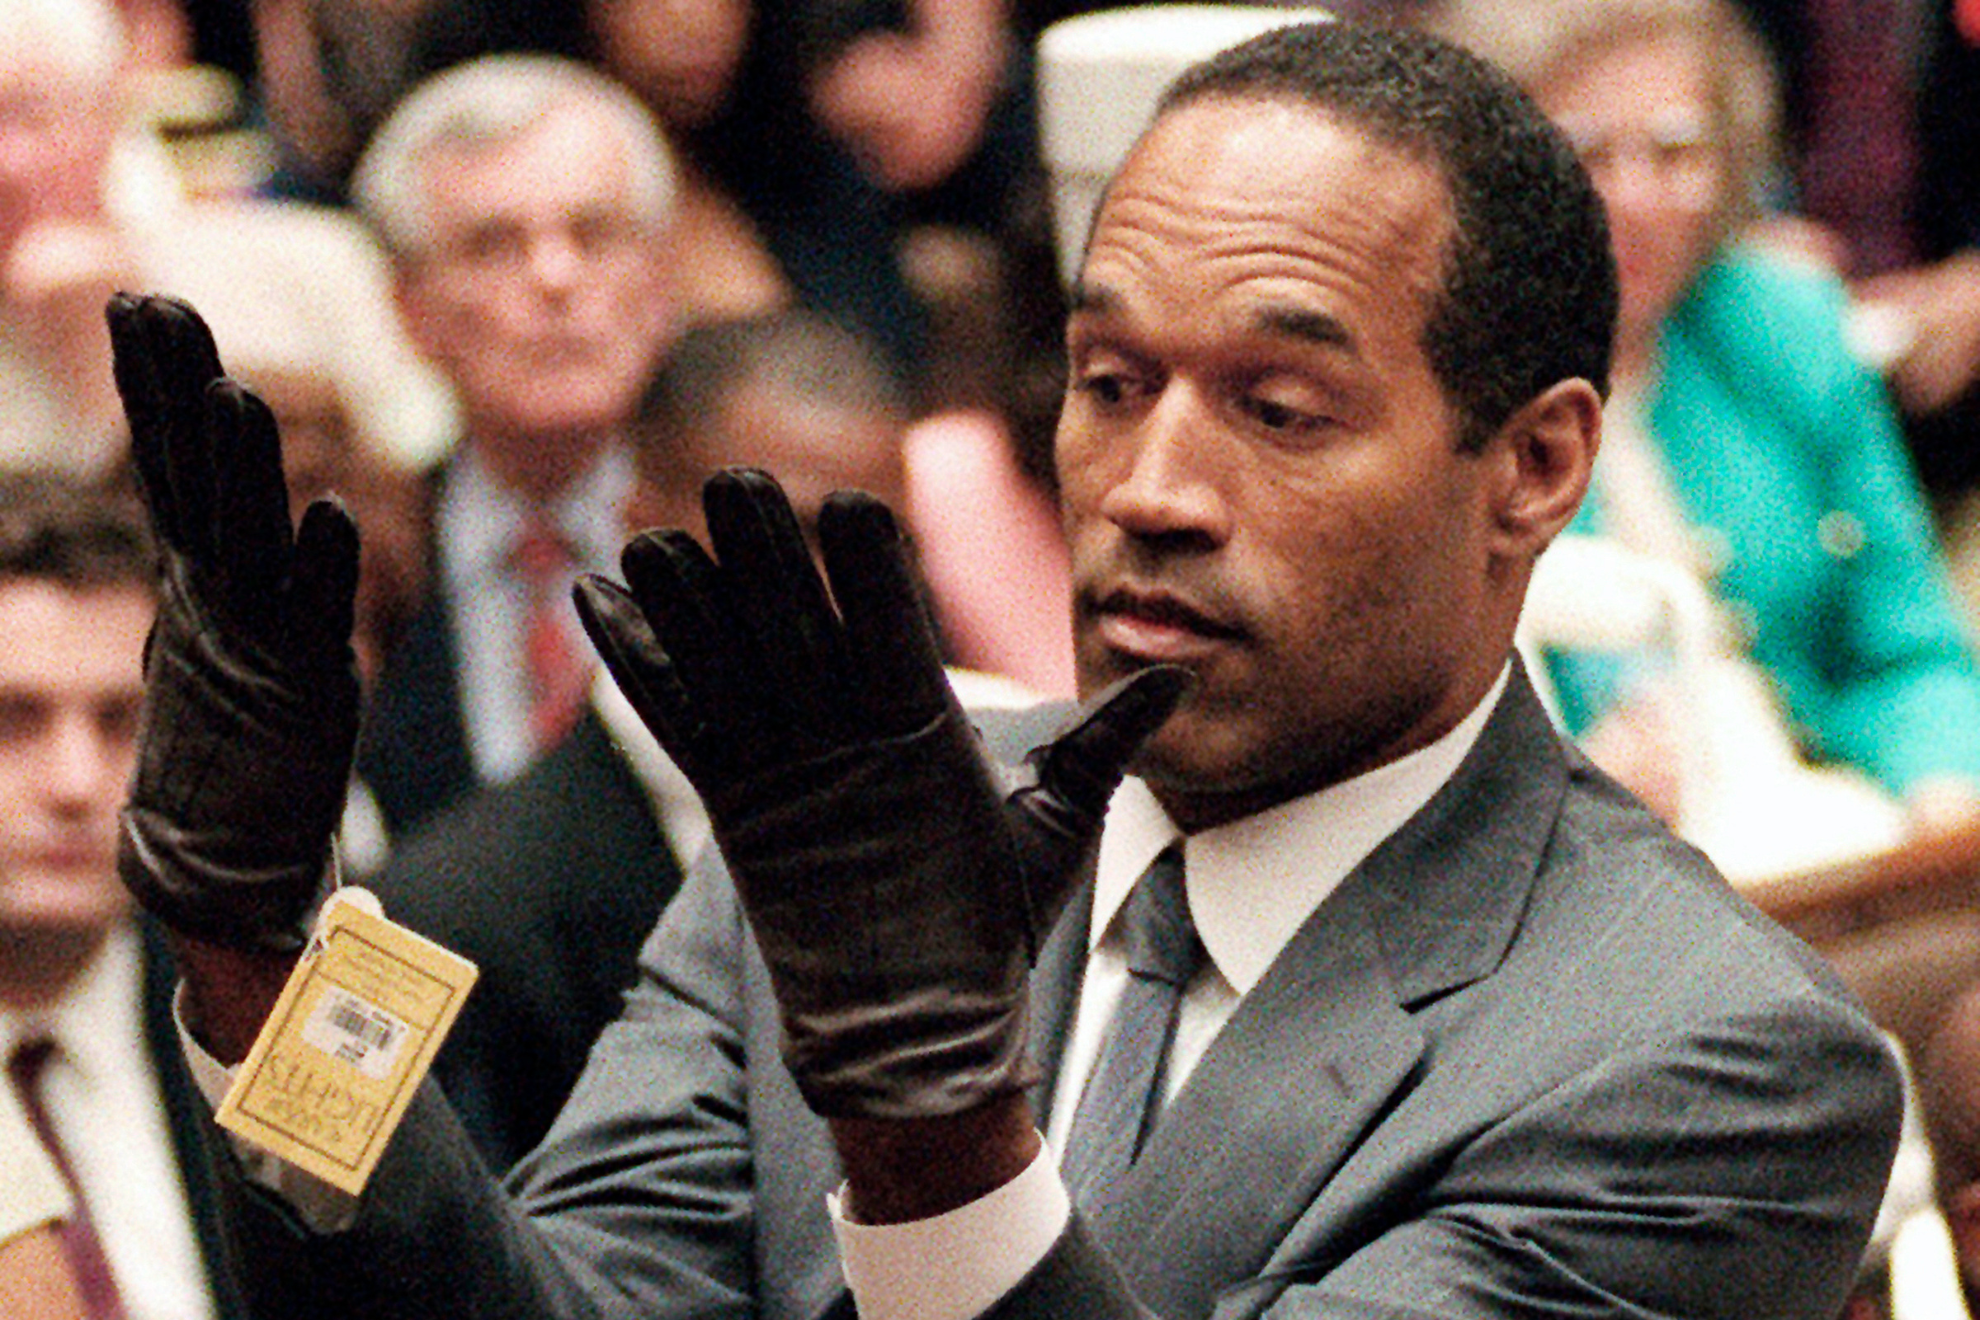 OJ Simpson tries on the gloves at his trial.